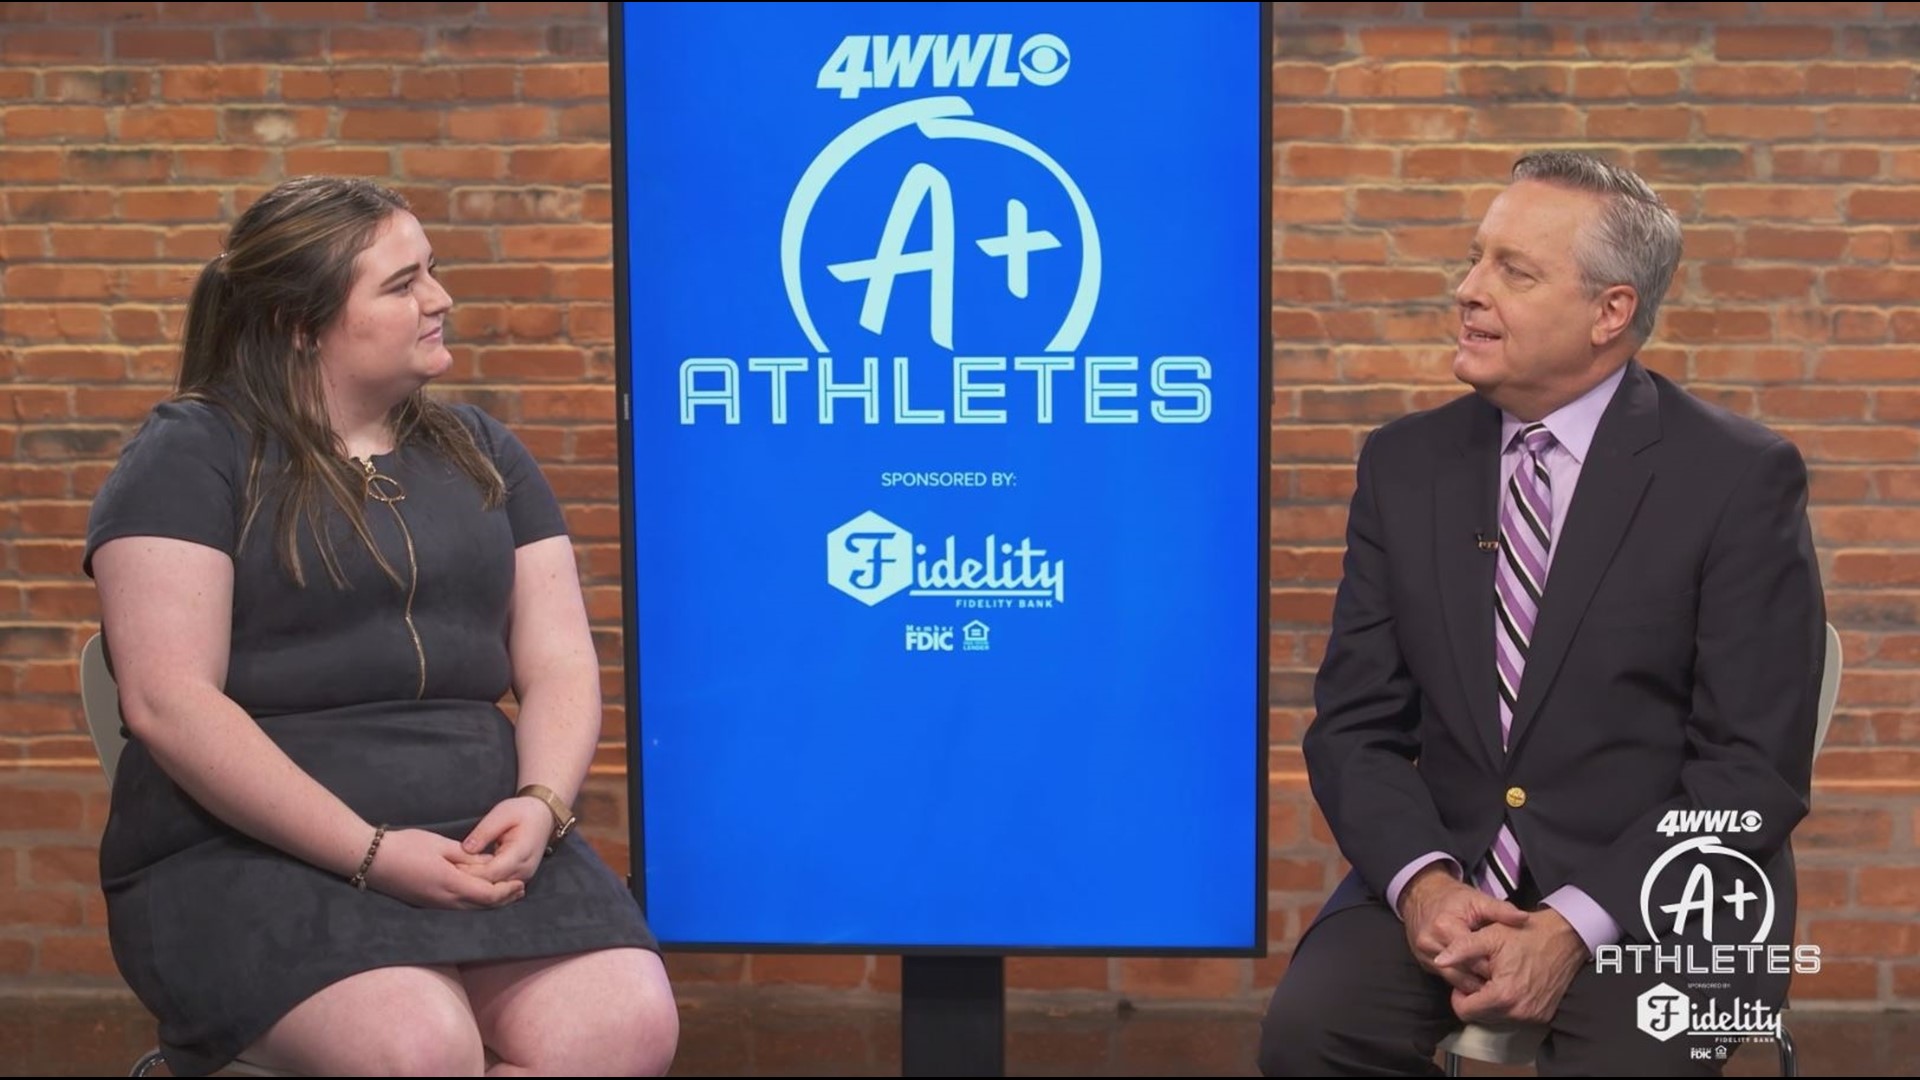 WWL-TV is honoring athletes who excel on and off the field, like Ellender High's Katelyn Dryden.